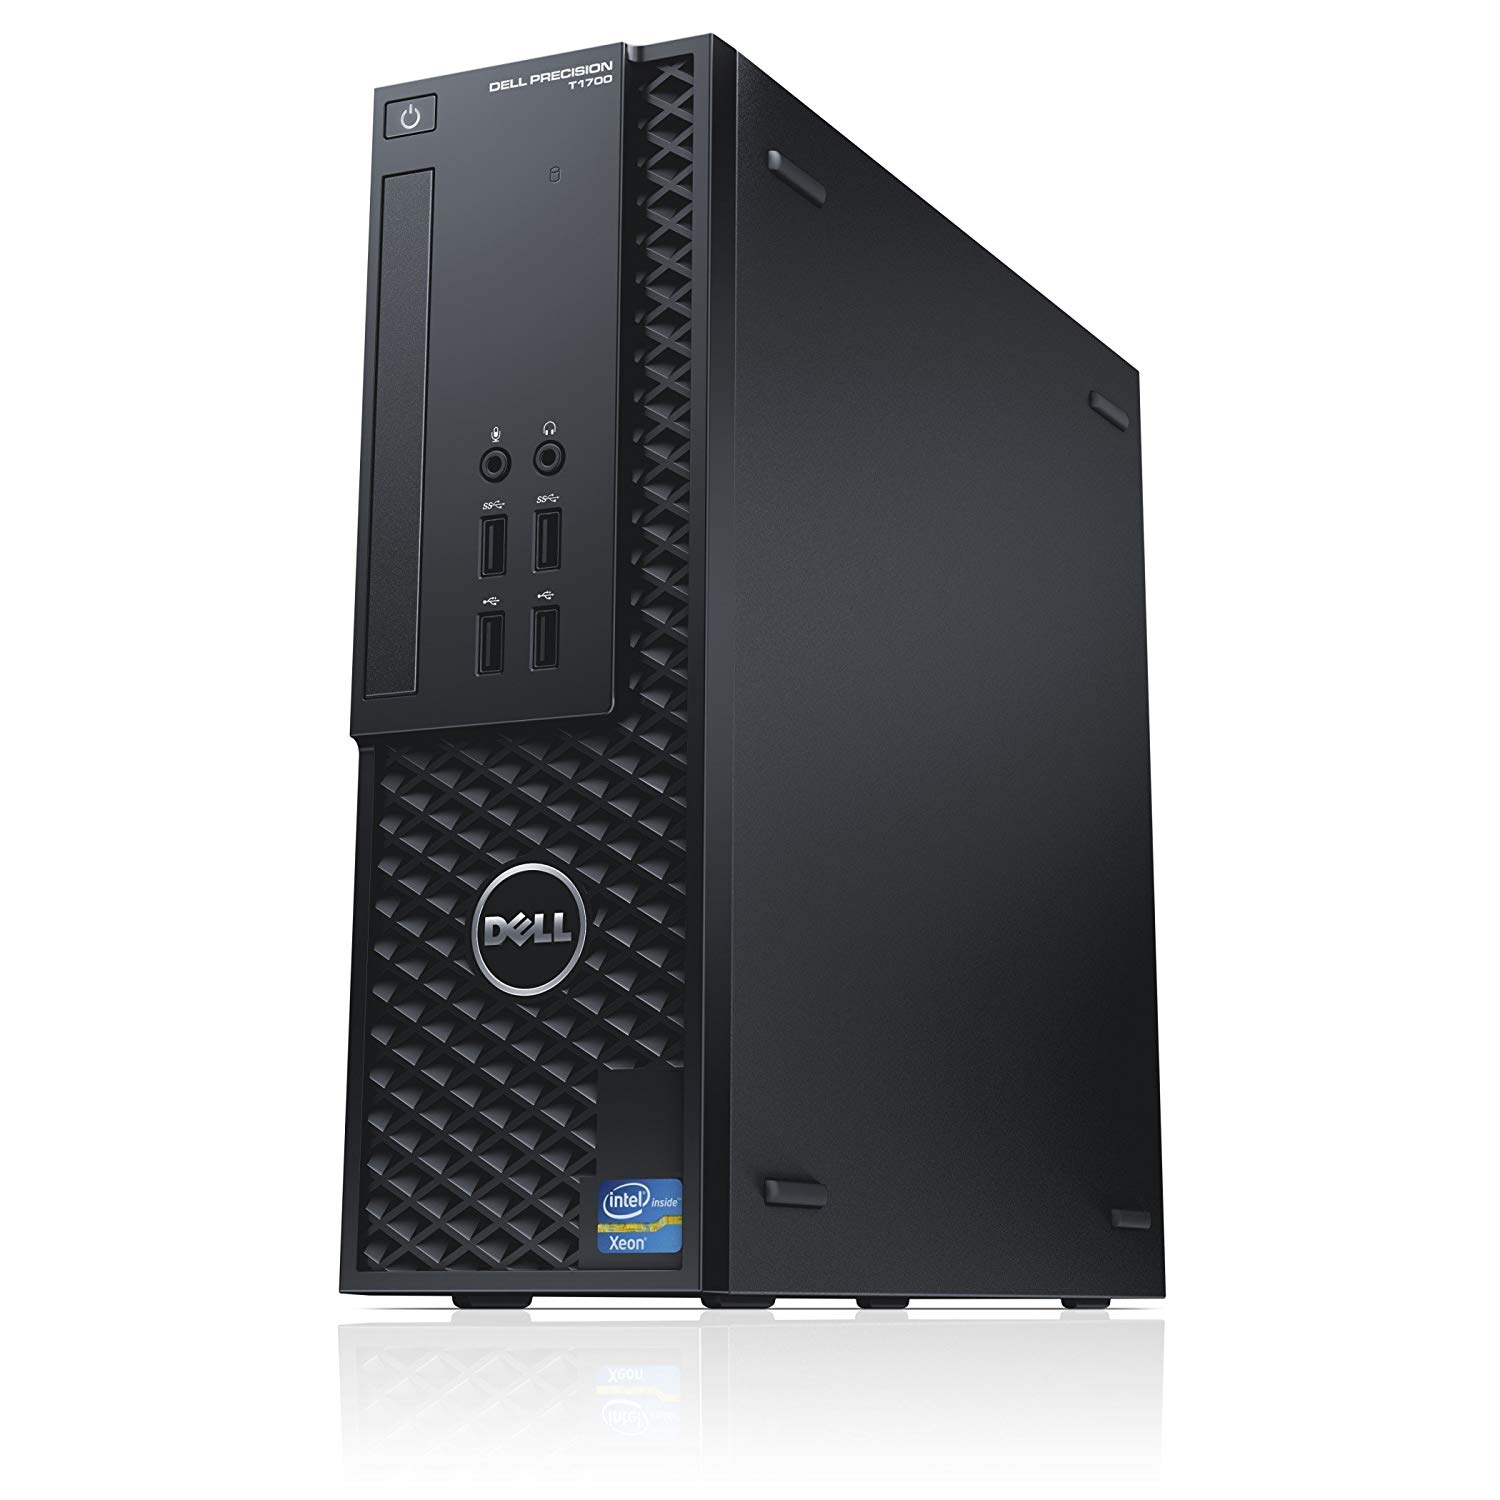 T1700 Gaming Pc Desktop Intel Core I3 4th Gen 500gb Hard Drive 8gb Ram 2gb Graphic Card Gta 5 Pubg Or Call Of Duty Games Installed Buy Online At Best